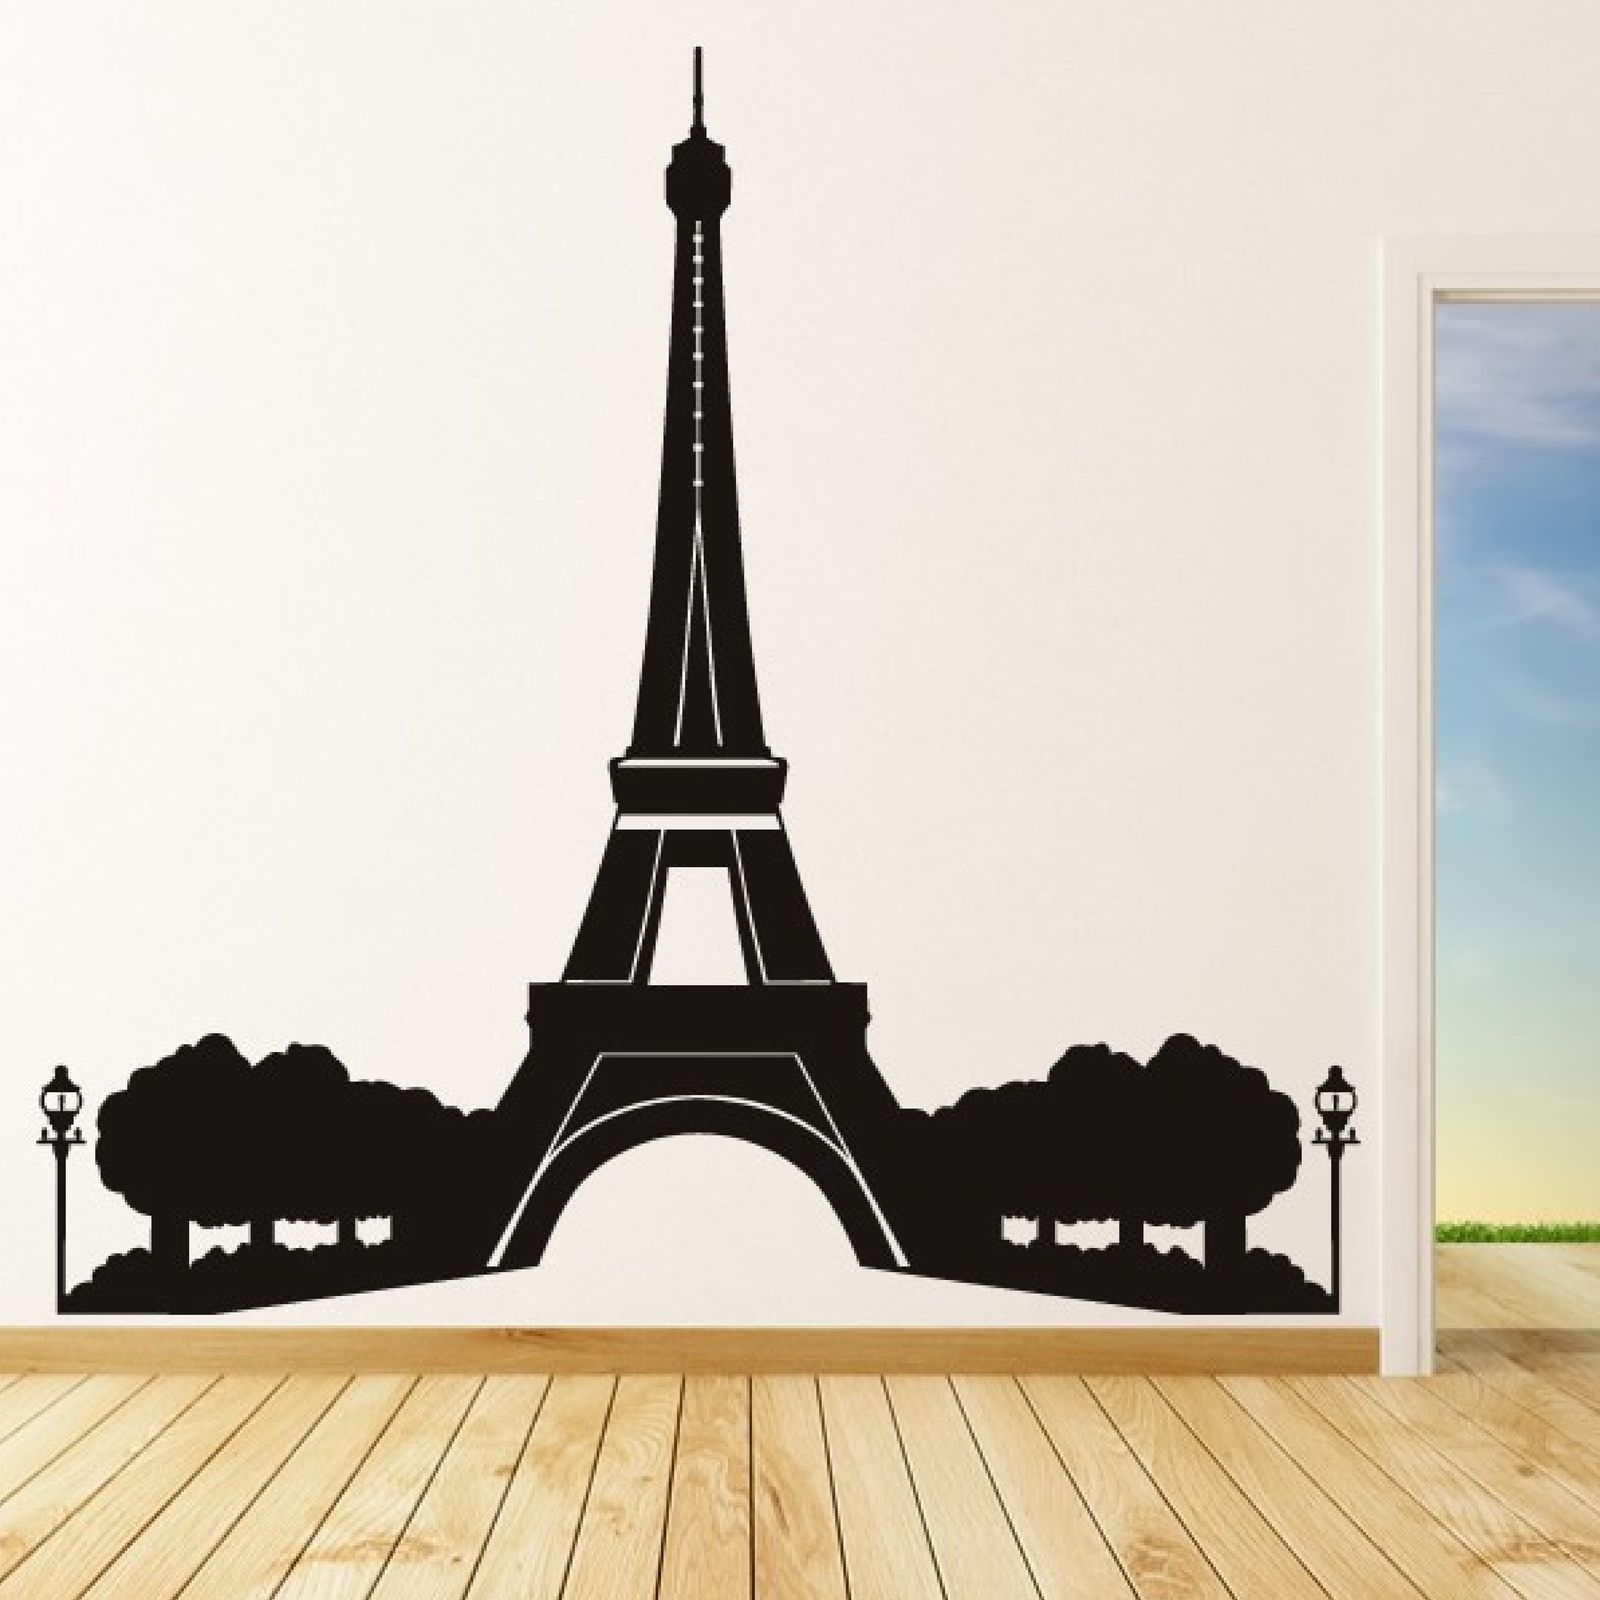 Unbelievable Nursery Eiffel Tower Wall Decal Image For Metal Decor Intended For Eiffel Tower Wall Art (View 14 of 20)